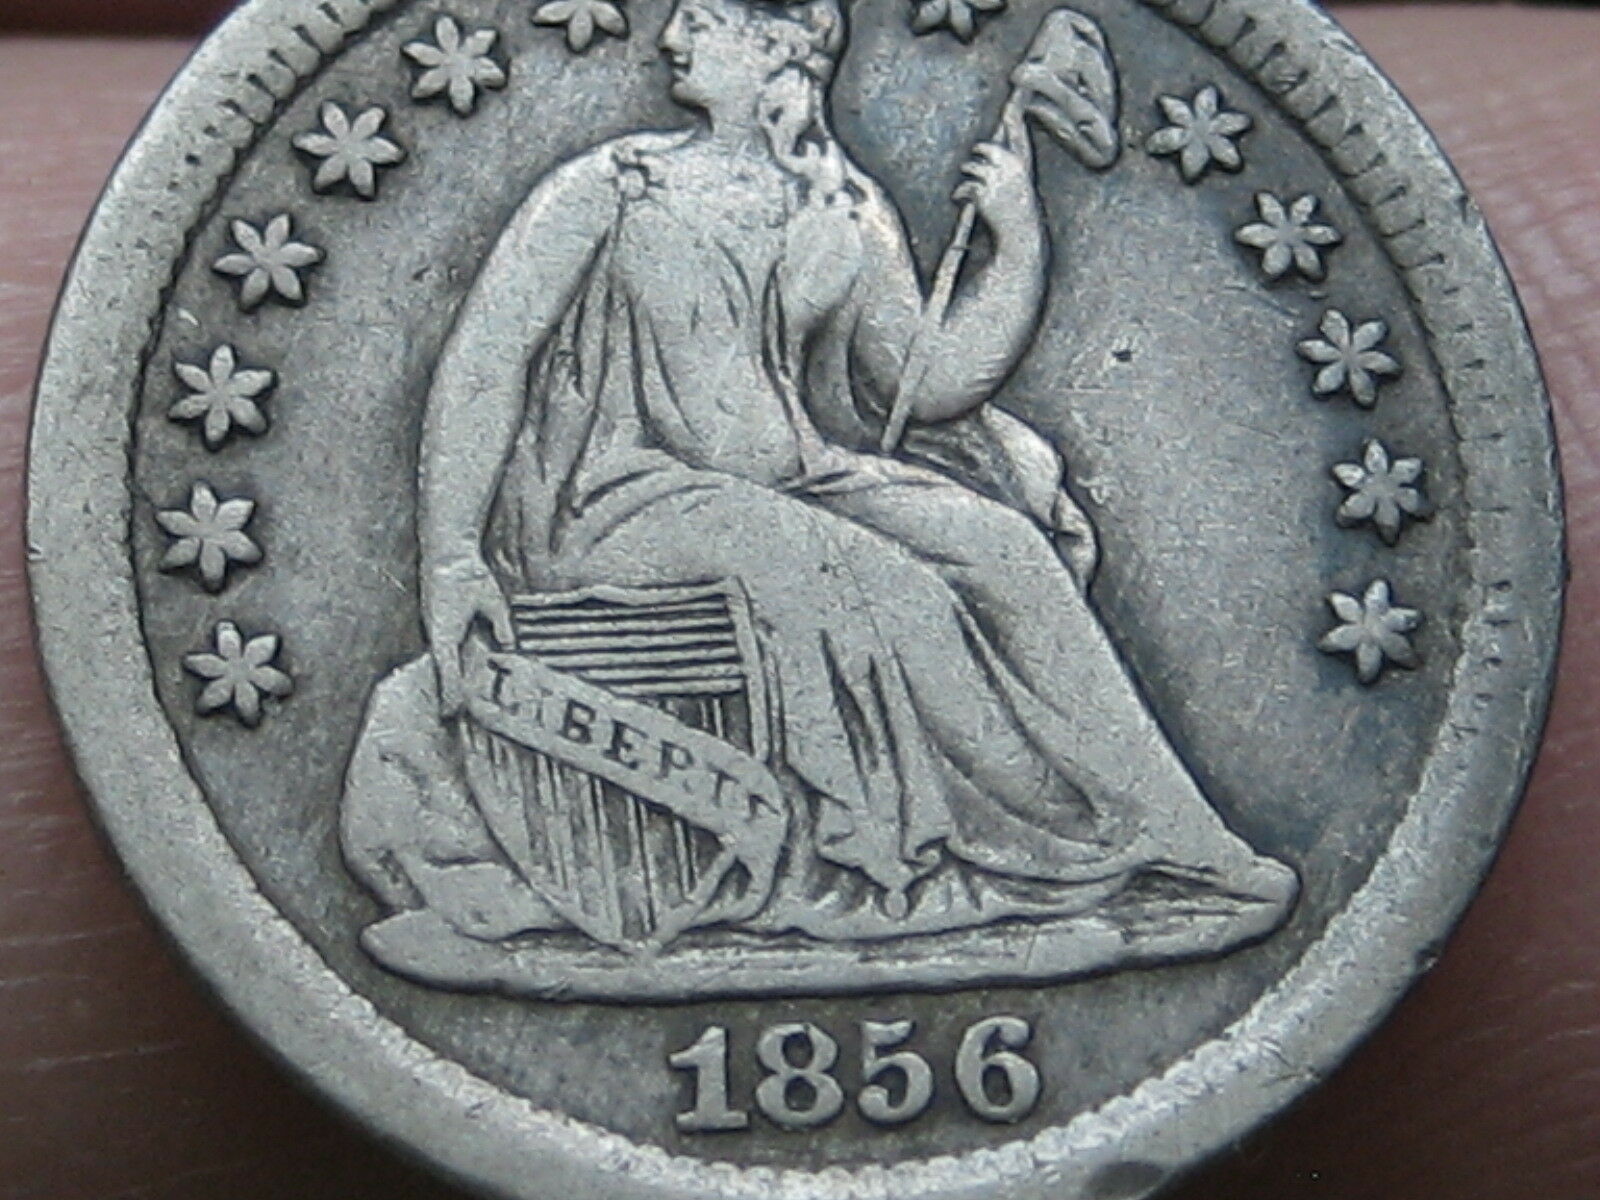 1856 P Seated Liberty Half Dime- VF/XF Details